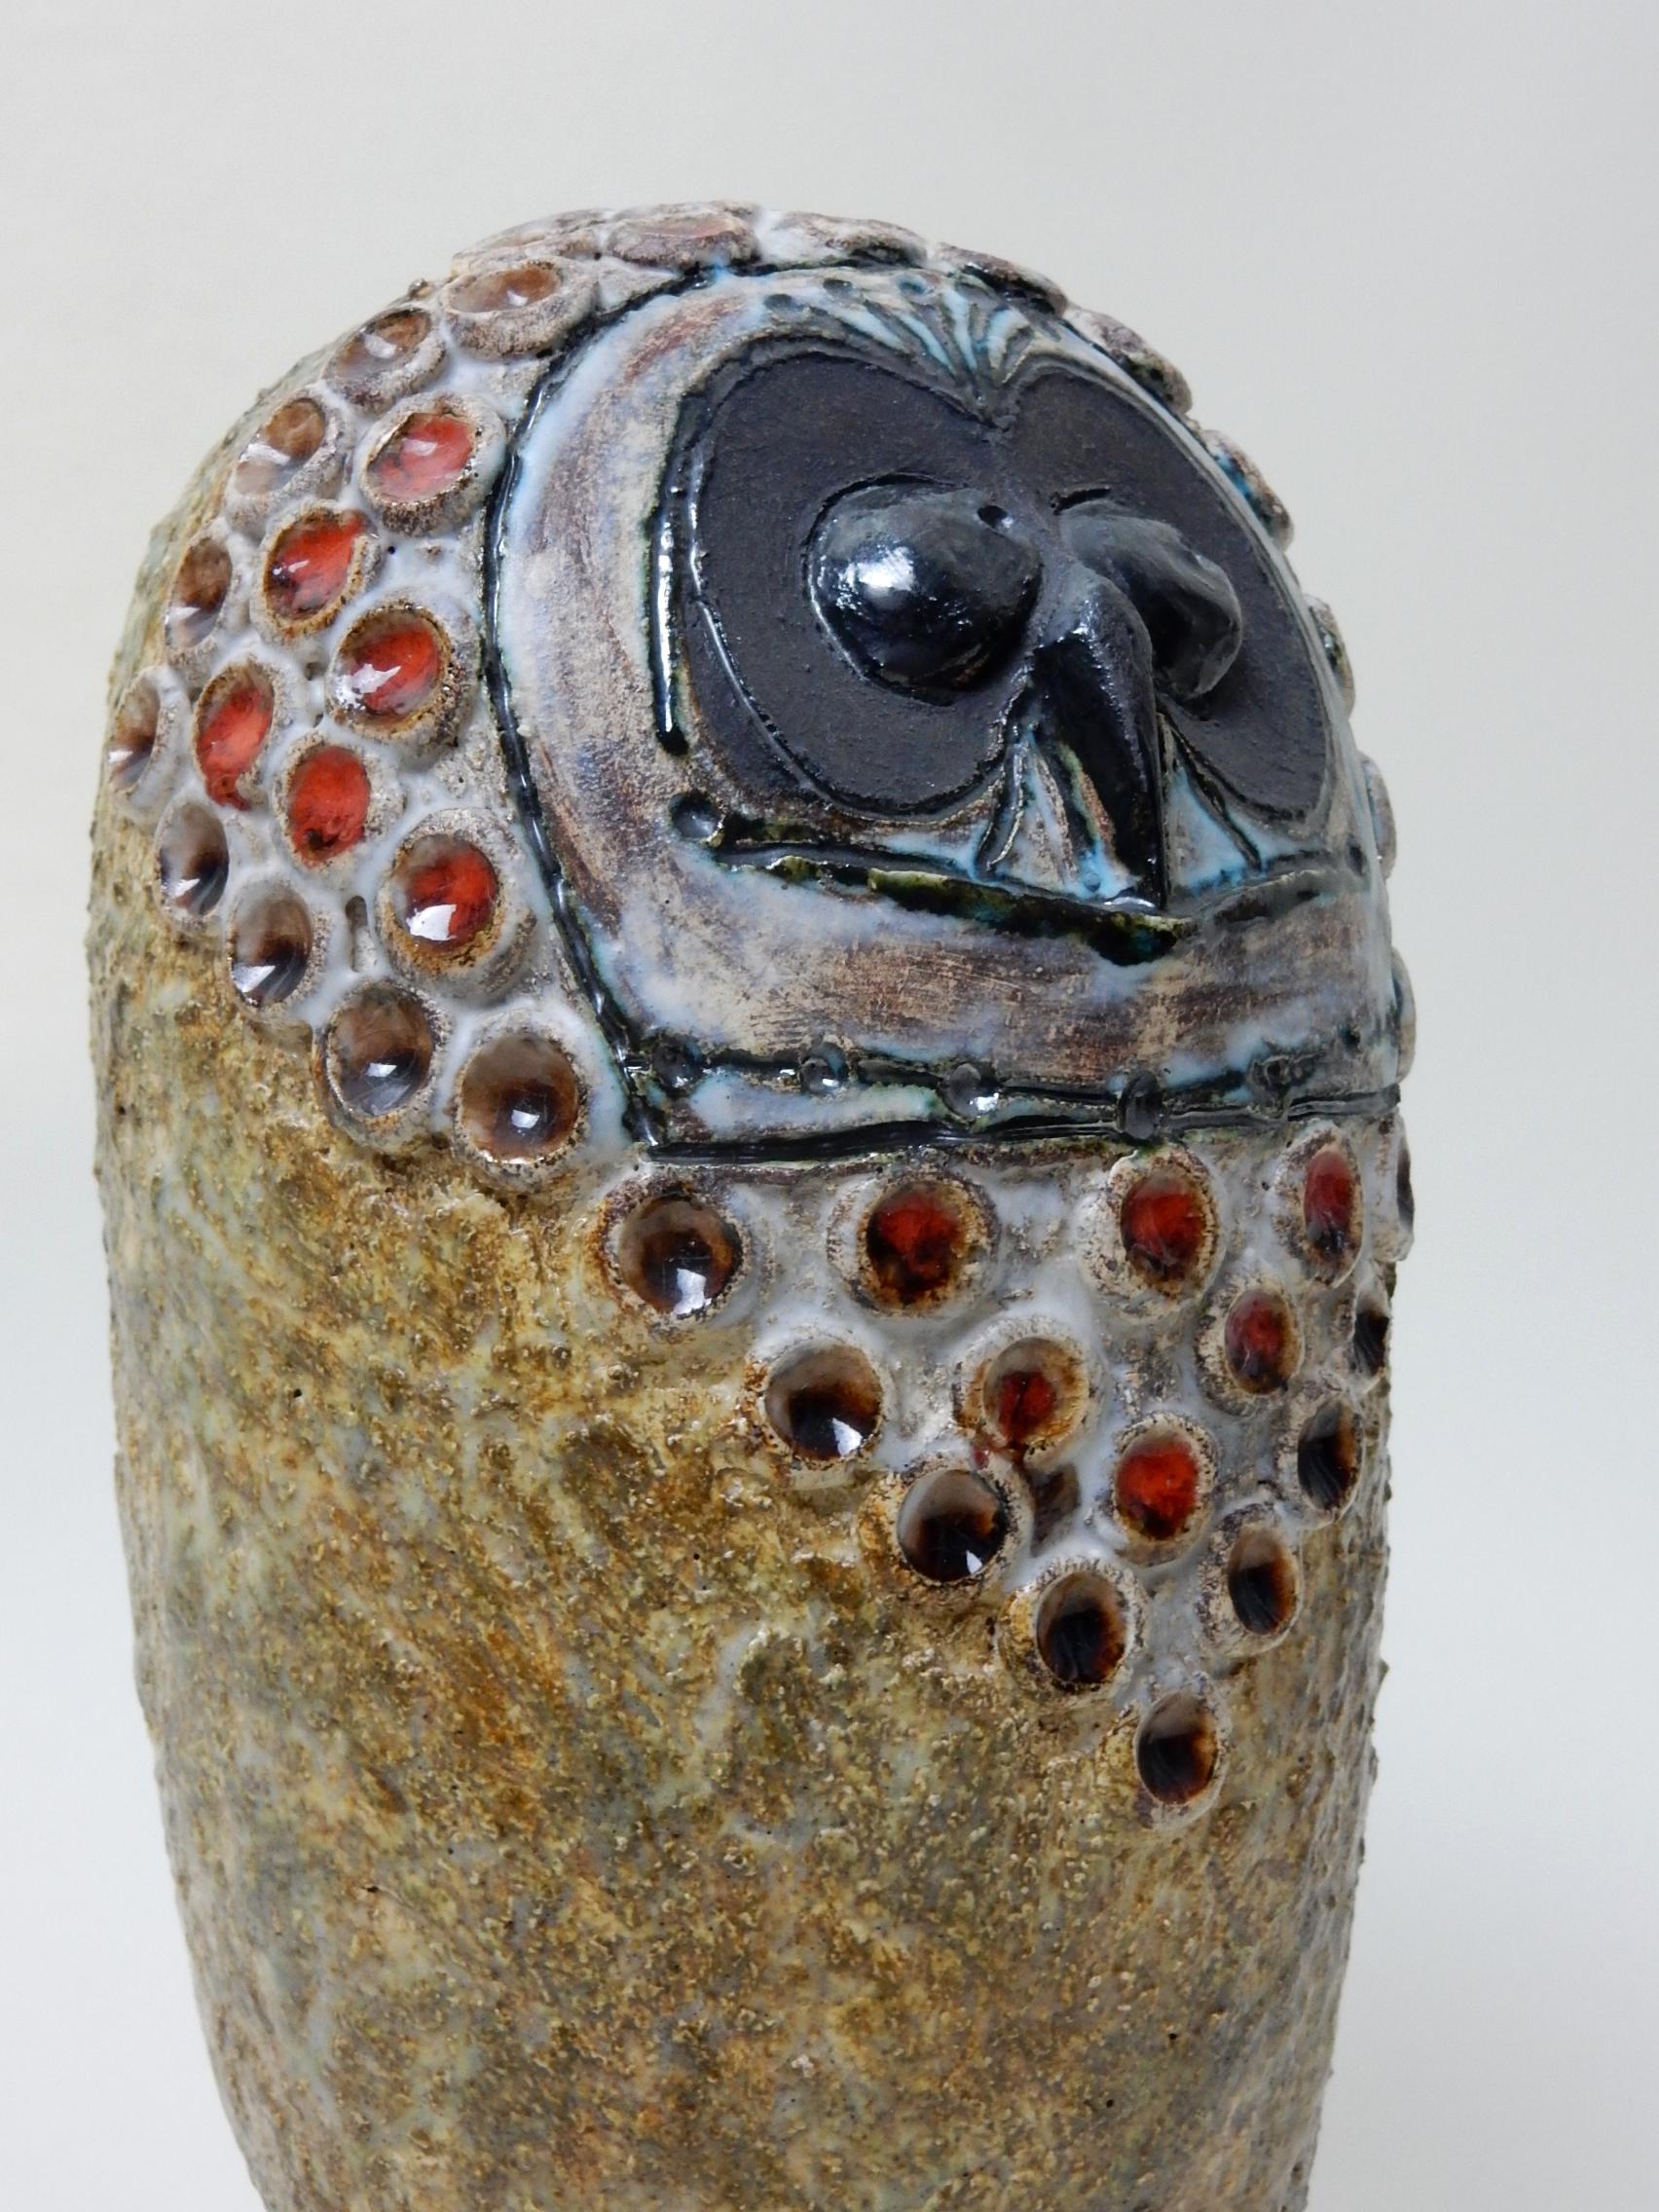 Rare art pottery modernist owl sculpture by French artist Raphaël Giarrusso, (1925-1986).
Signed RG and date 67, made in France.
Flawless condition. Sets on a 2-1/2